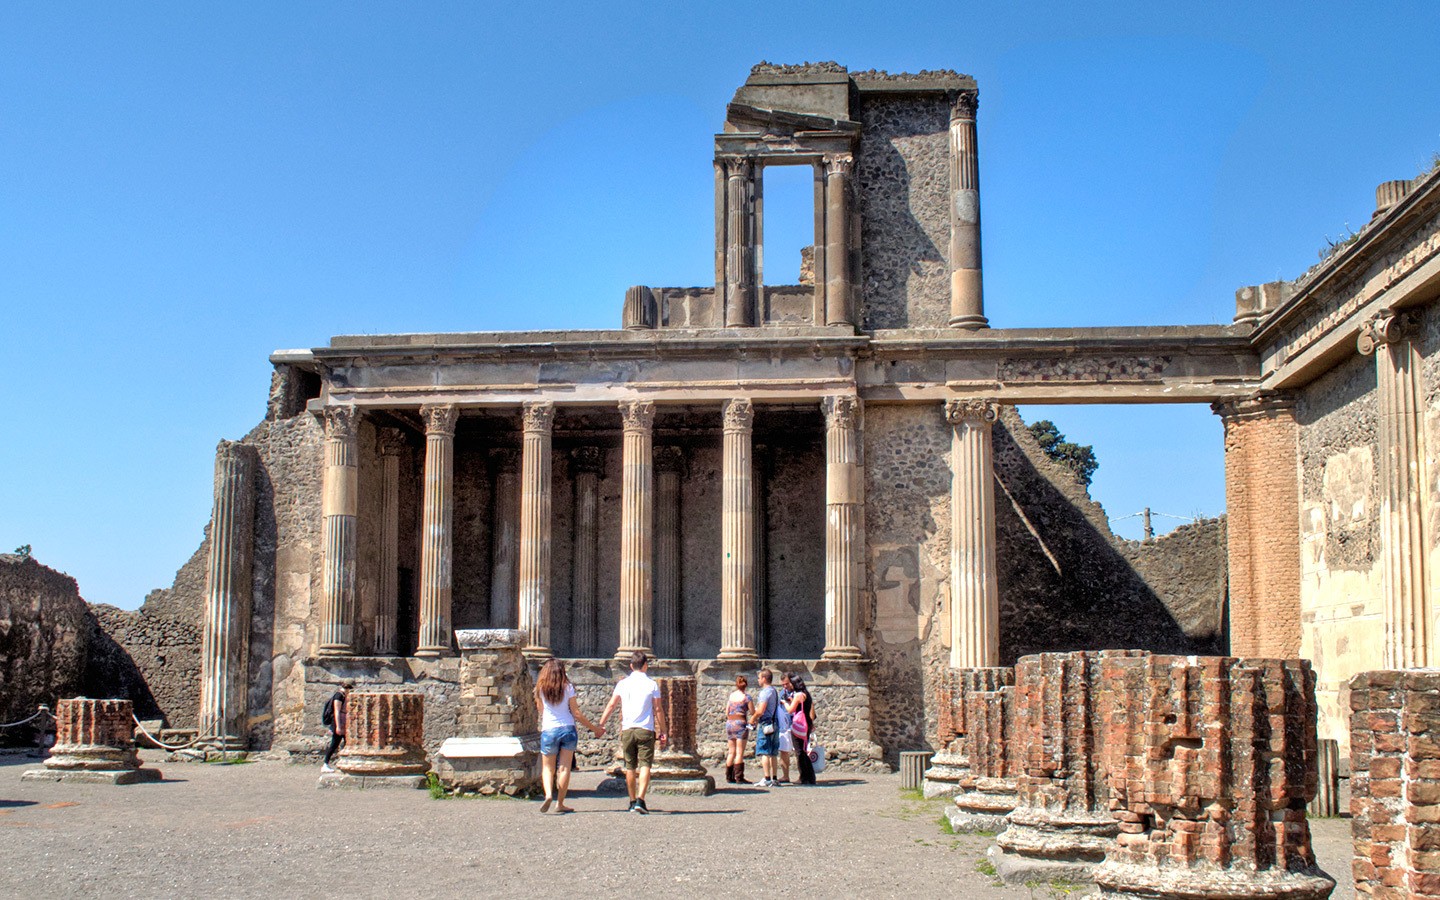 The Basilica of the buried Roman city of Pompeii, Italy